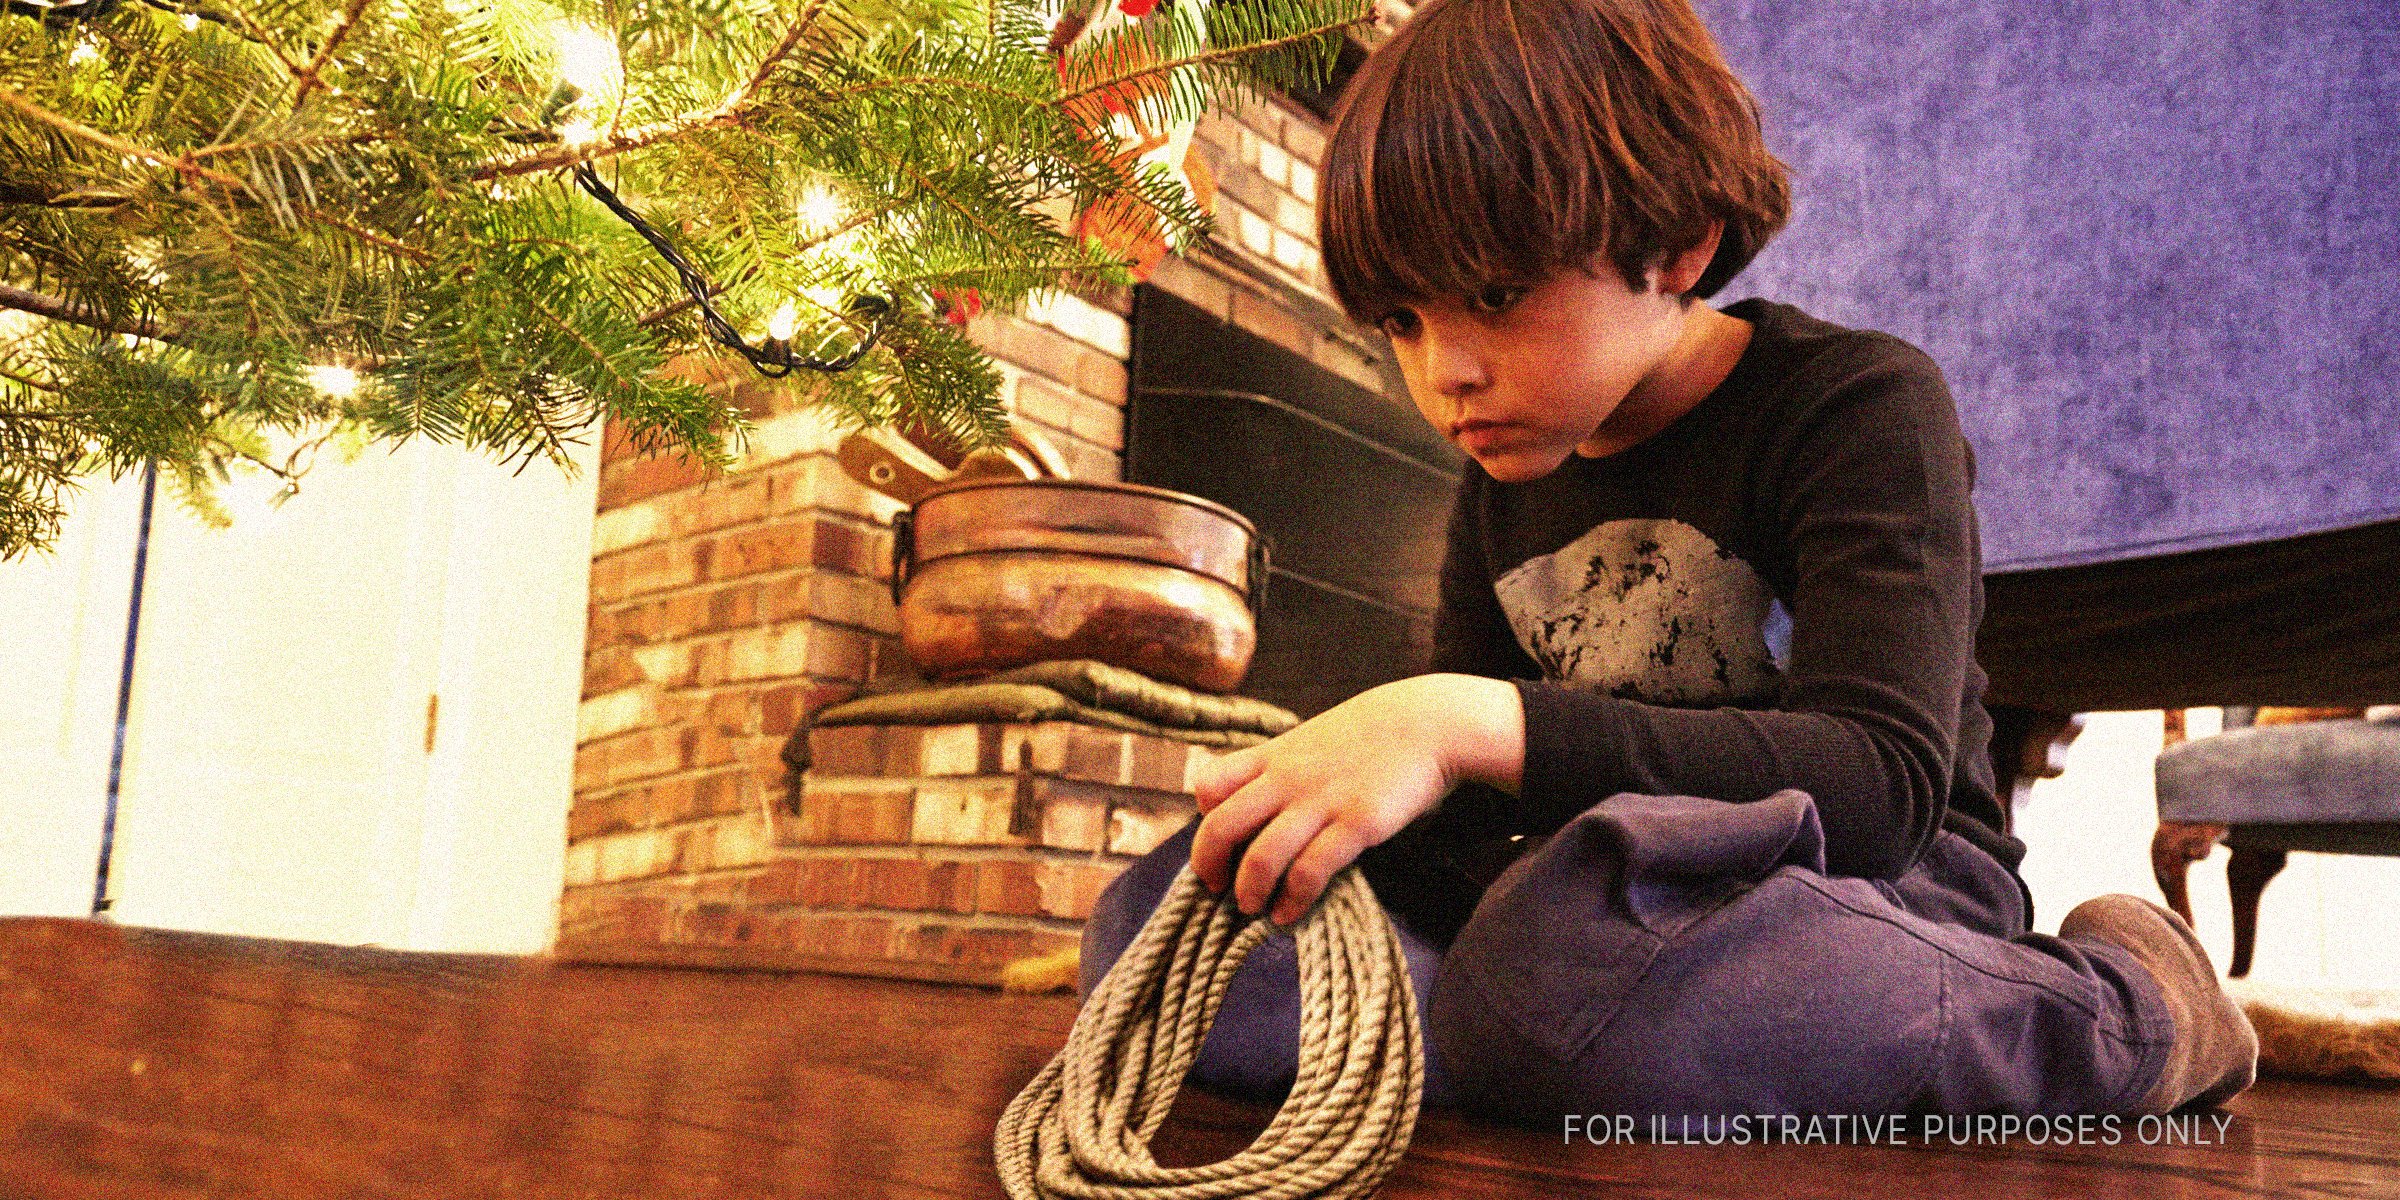 Boy with a rope under a Christmas tree | Source: Getty Images 